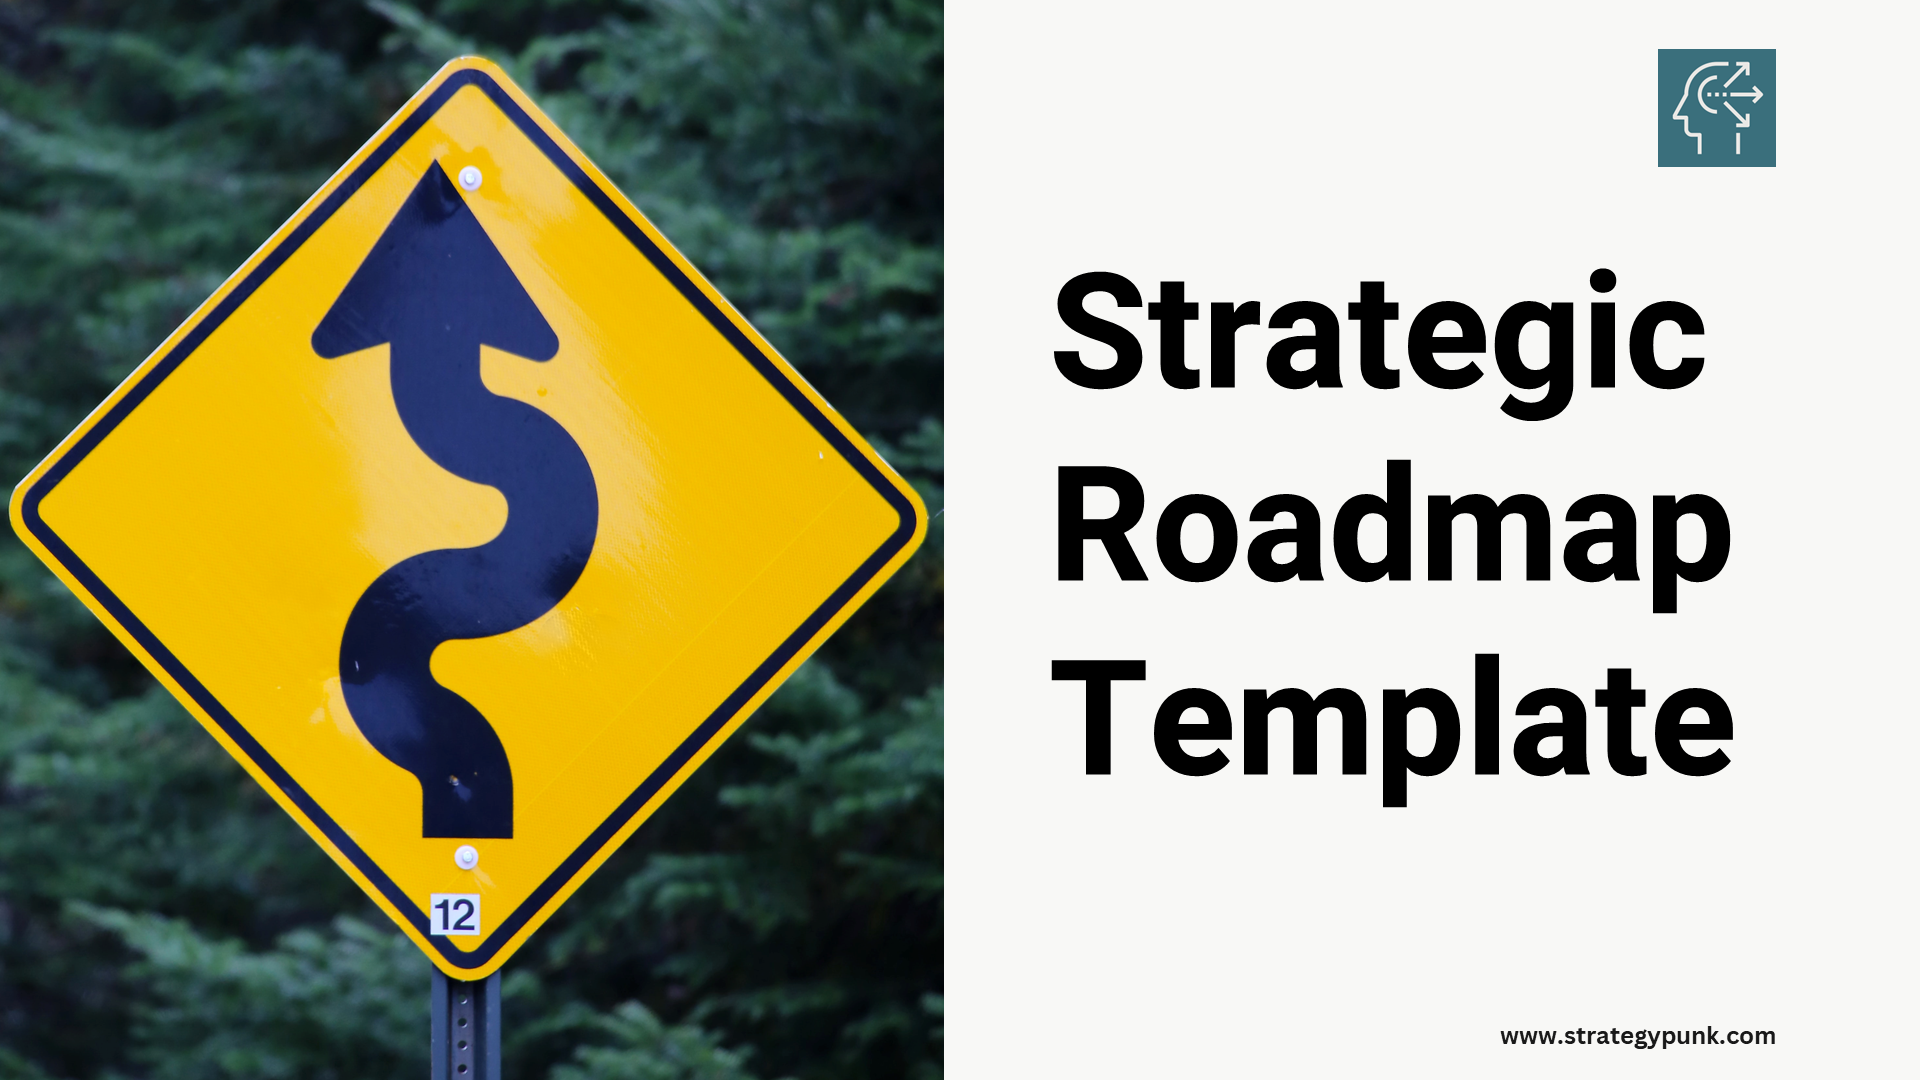 Navigate the Road to Success: Strategic Roadmap Template (Free PowerPoint)